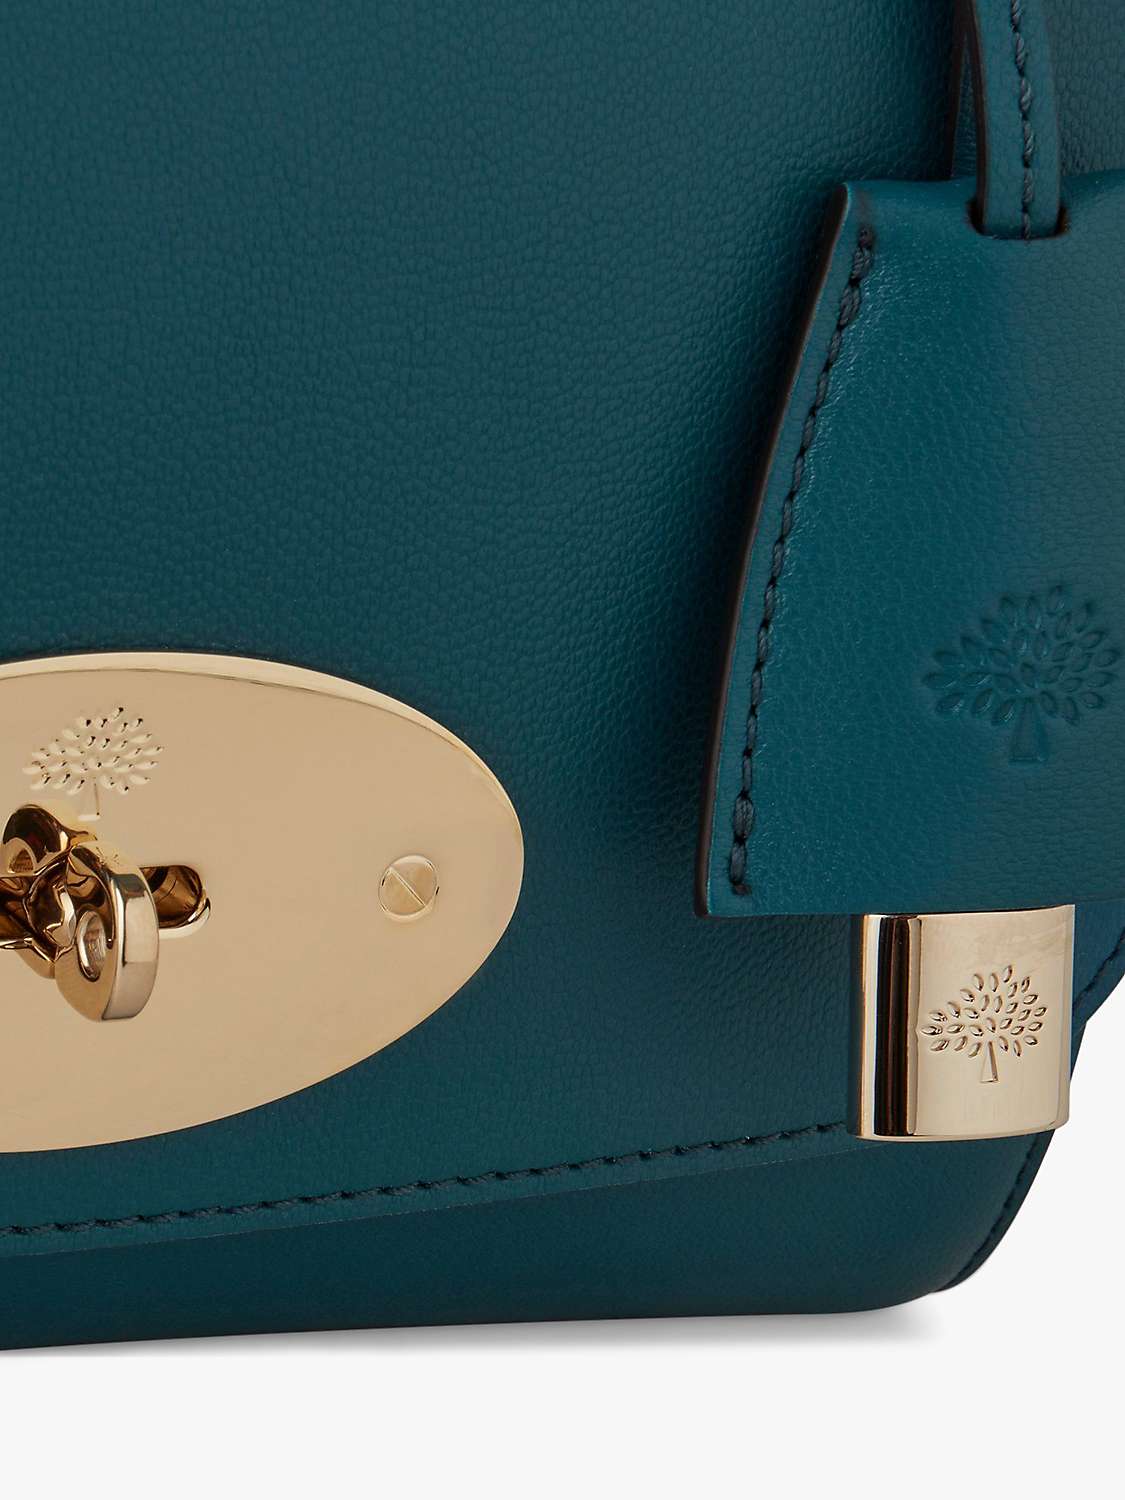 Buy Mulberry Lily Micro Classic Grain Leather Shoulder Bag Online at johnlewis.com